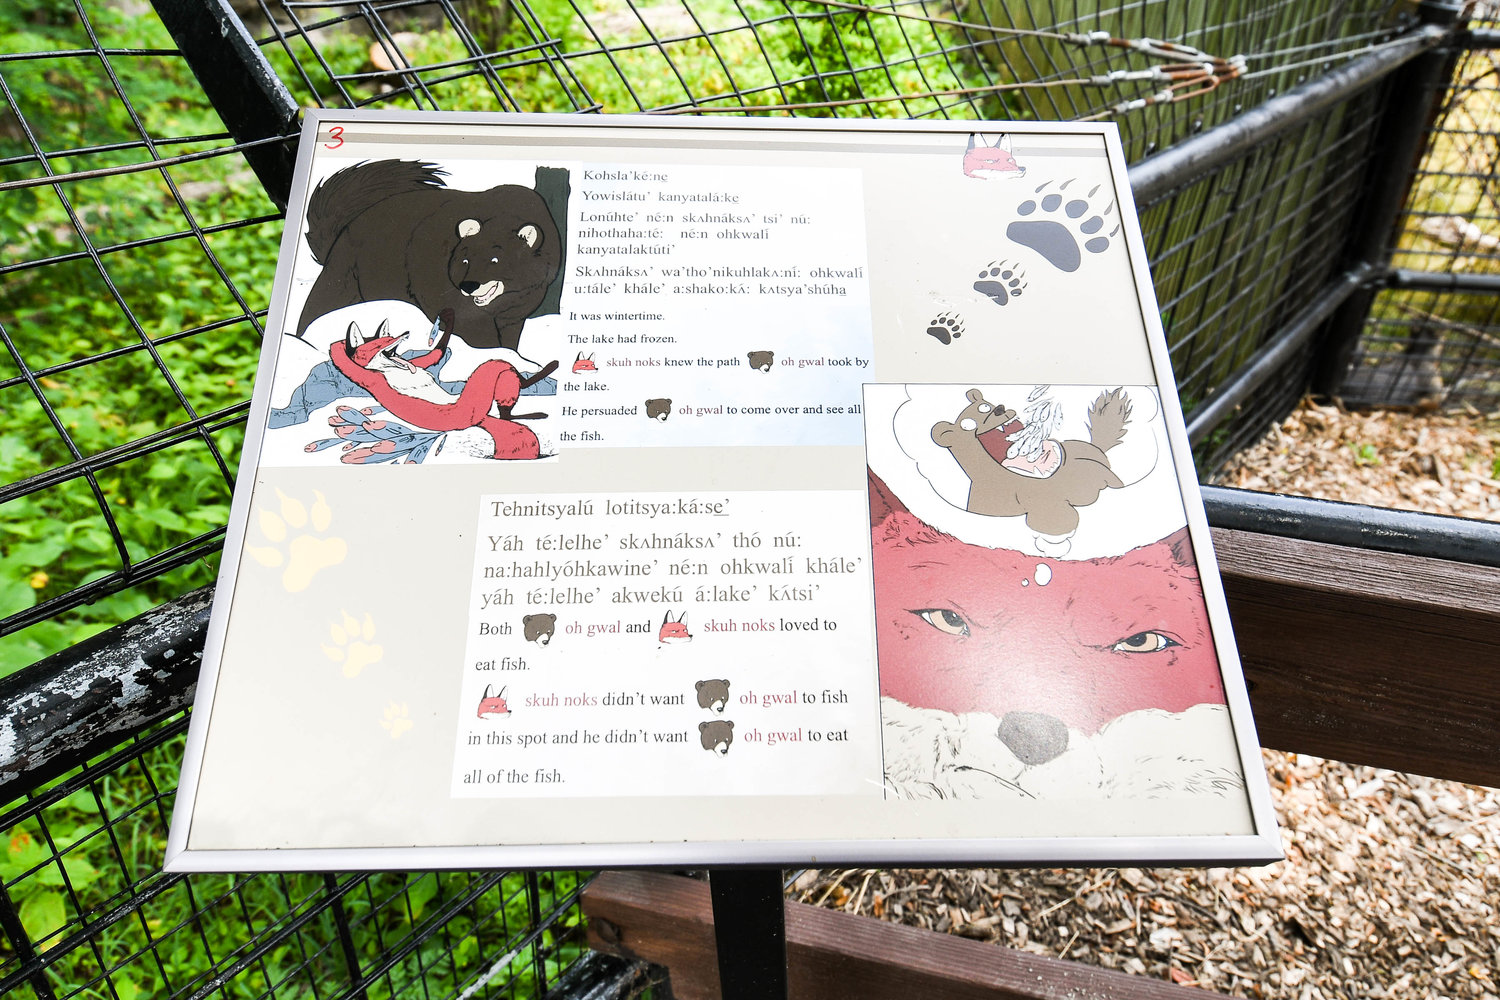 The Utica Zoo recently installed the new Story Walk display developed by the Oneida Indian Nation and Colgate University in its children’s zoo section near the main entrance.